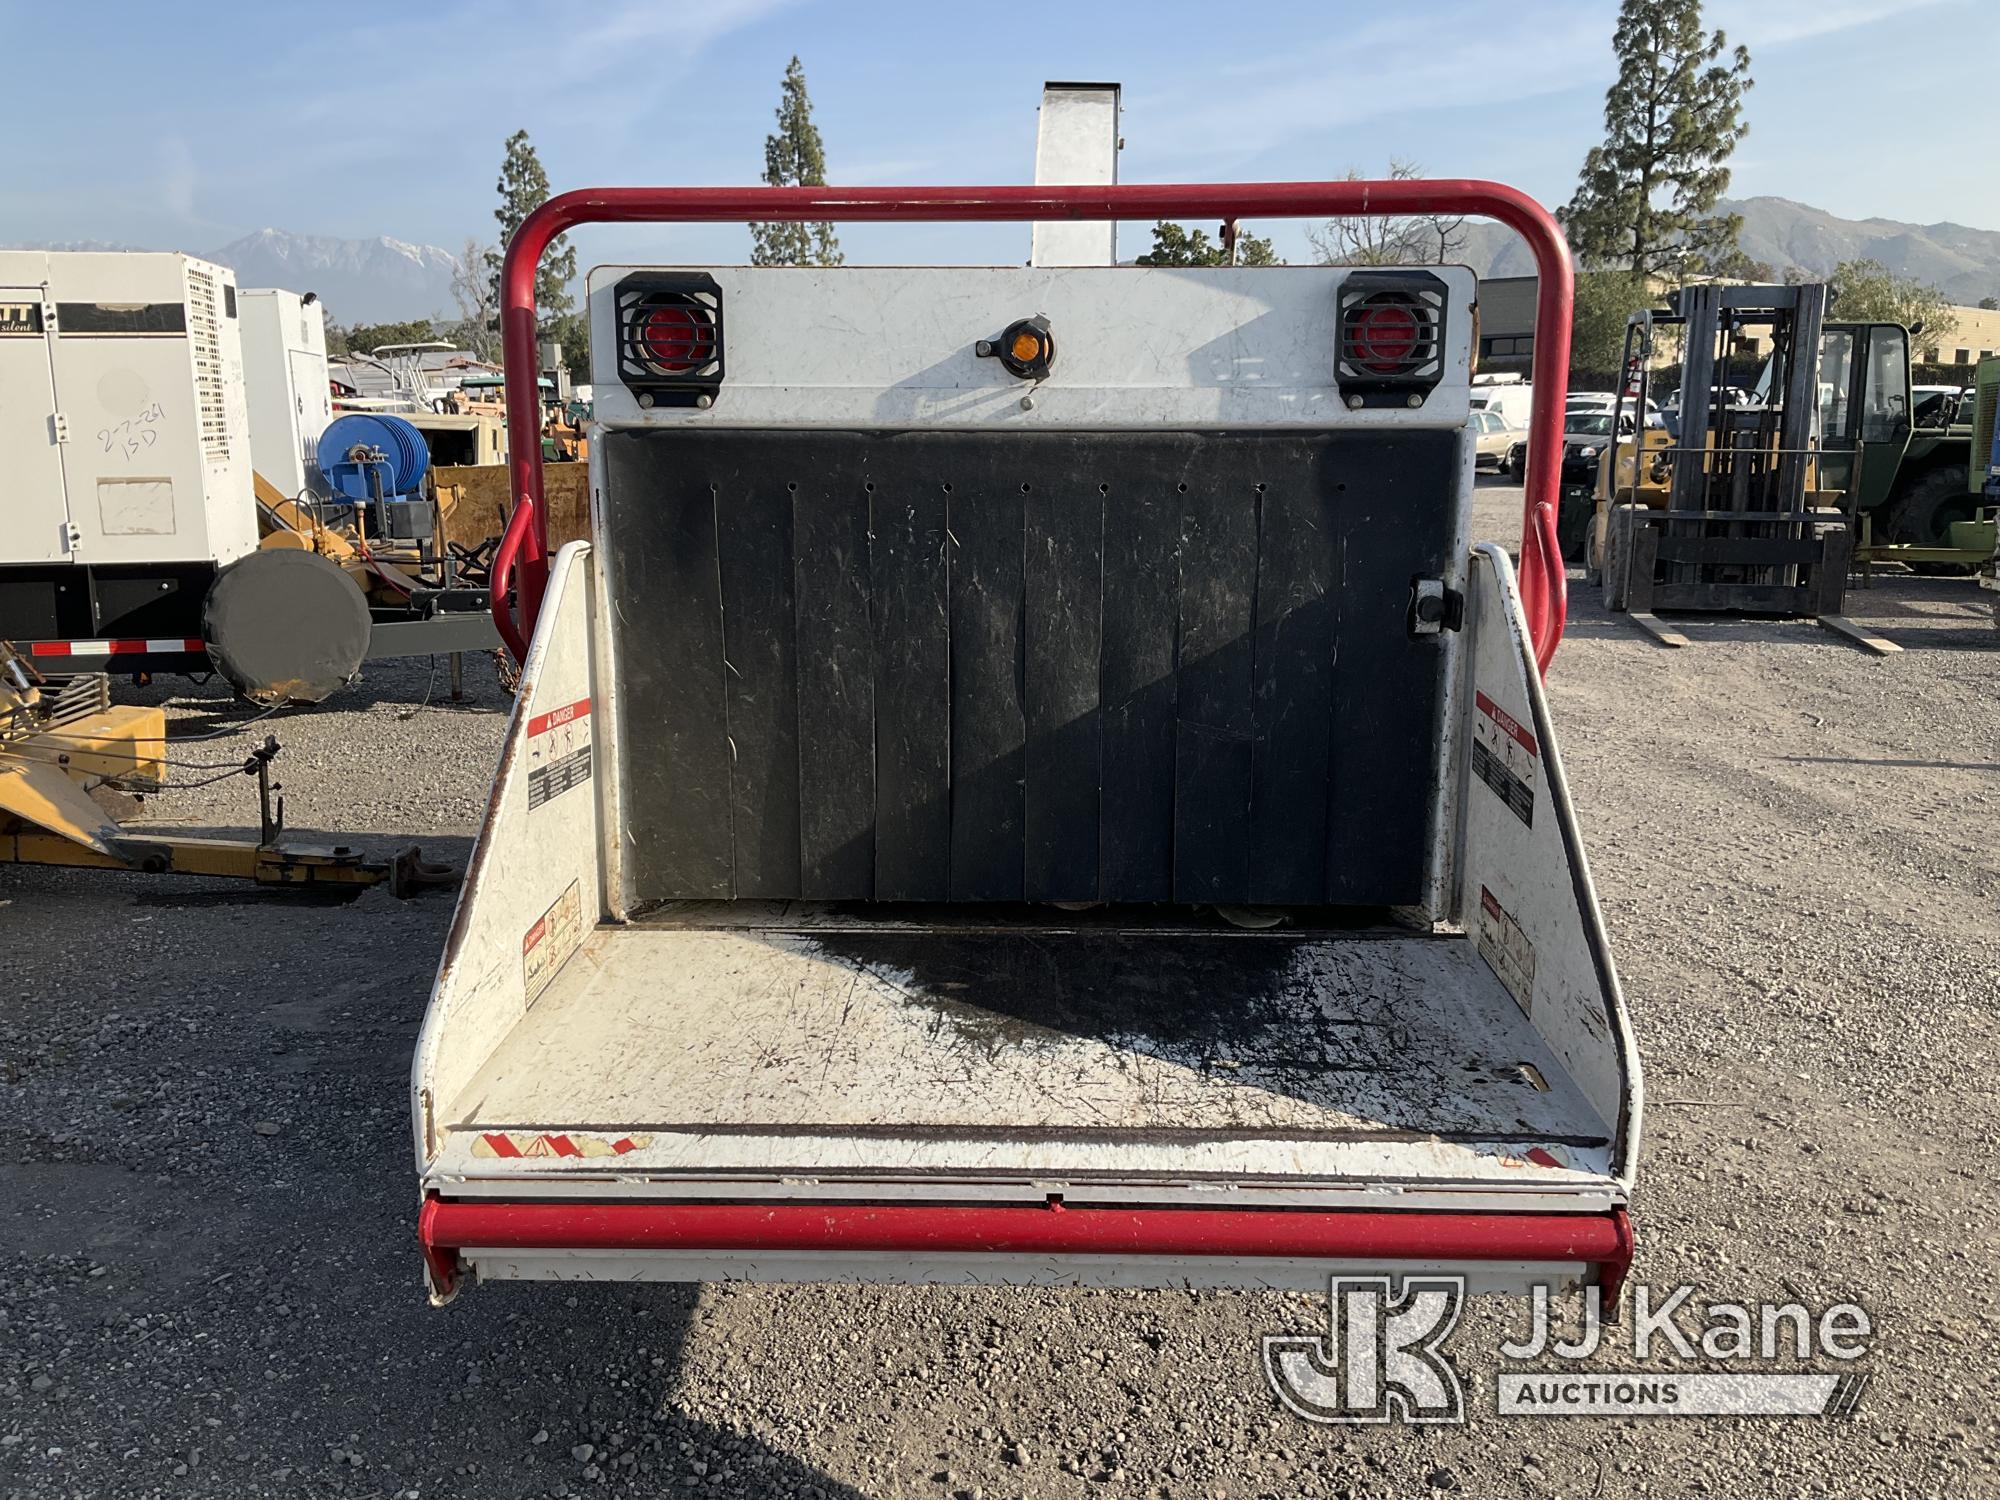 (Jurupa Valley, CA) 2012 Vermeer BC1000XL Chipper (12in Drum) Not Running, Condition Unknown) (Bad E